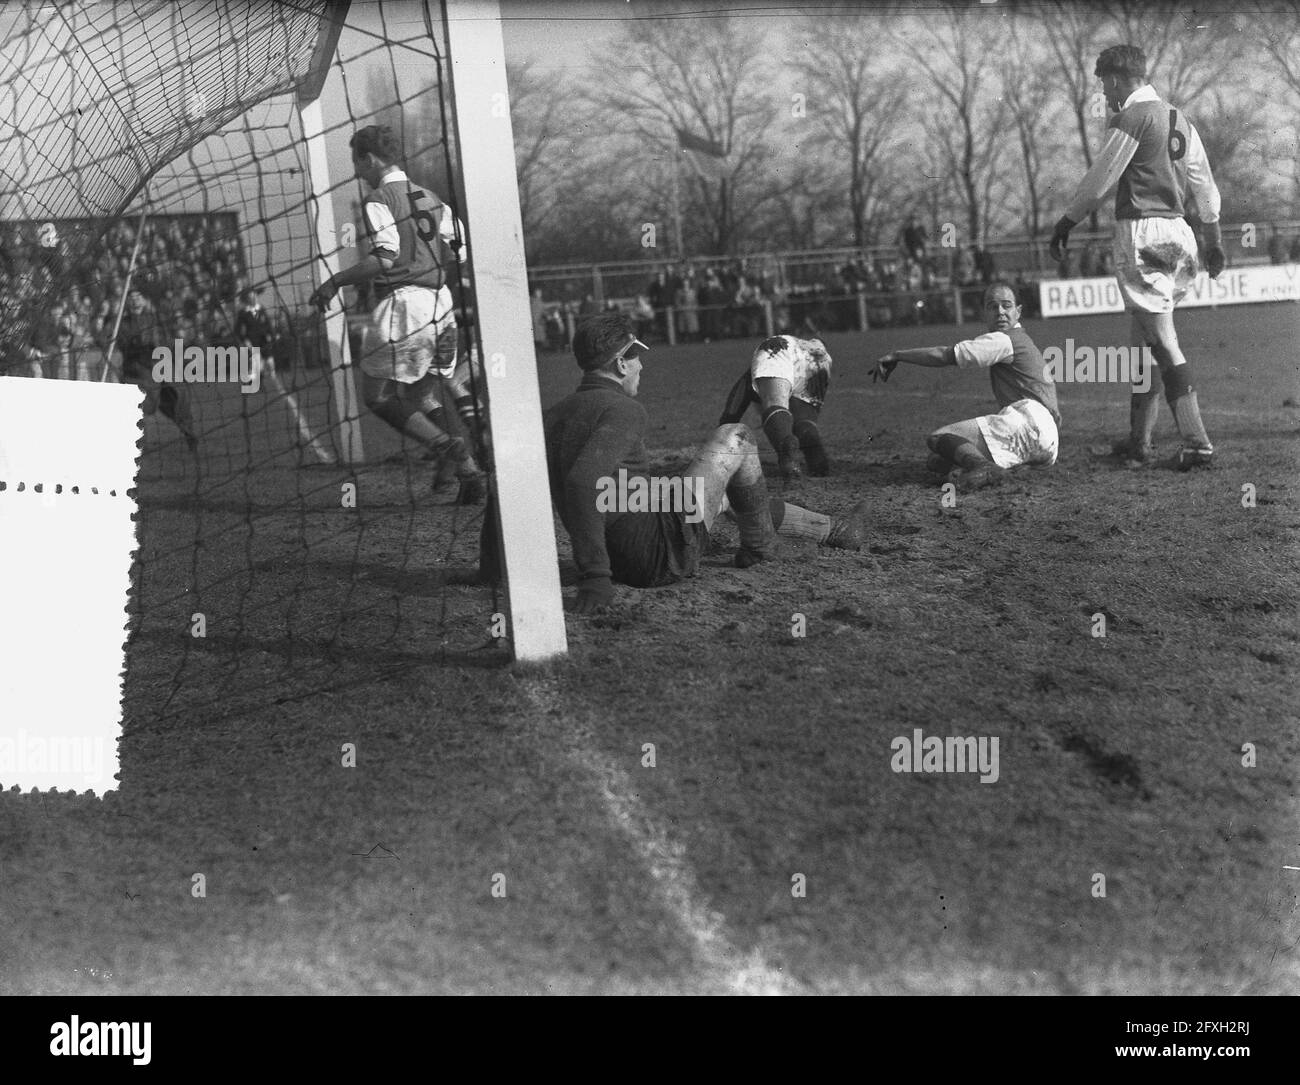 Soccer DWS against SVV 5-1, second goal, March 6, 1955, goals, sports, soccer, The Netherlands, 20th century press agency photo, news to remember, documentary, historic photography 1945-1990, visual stories, human history of the Twentieth Century, capturing moments in time Stock Photo